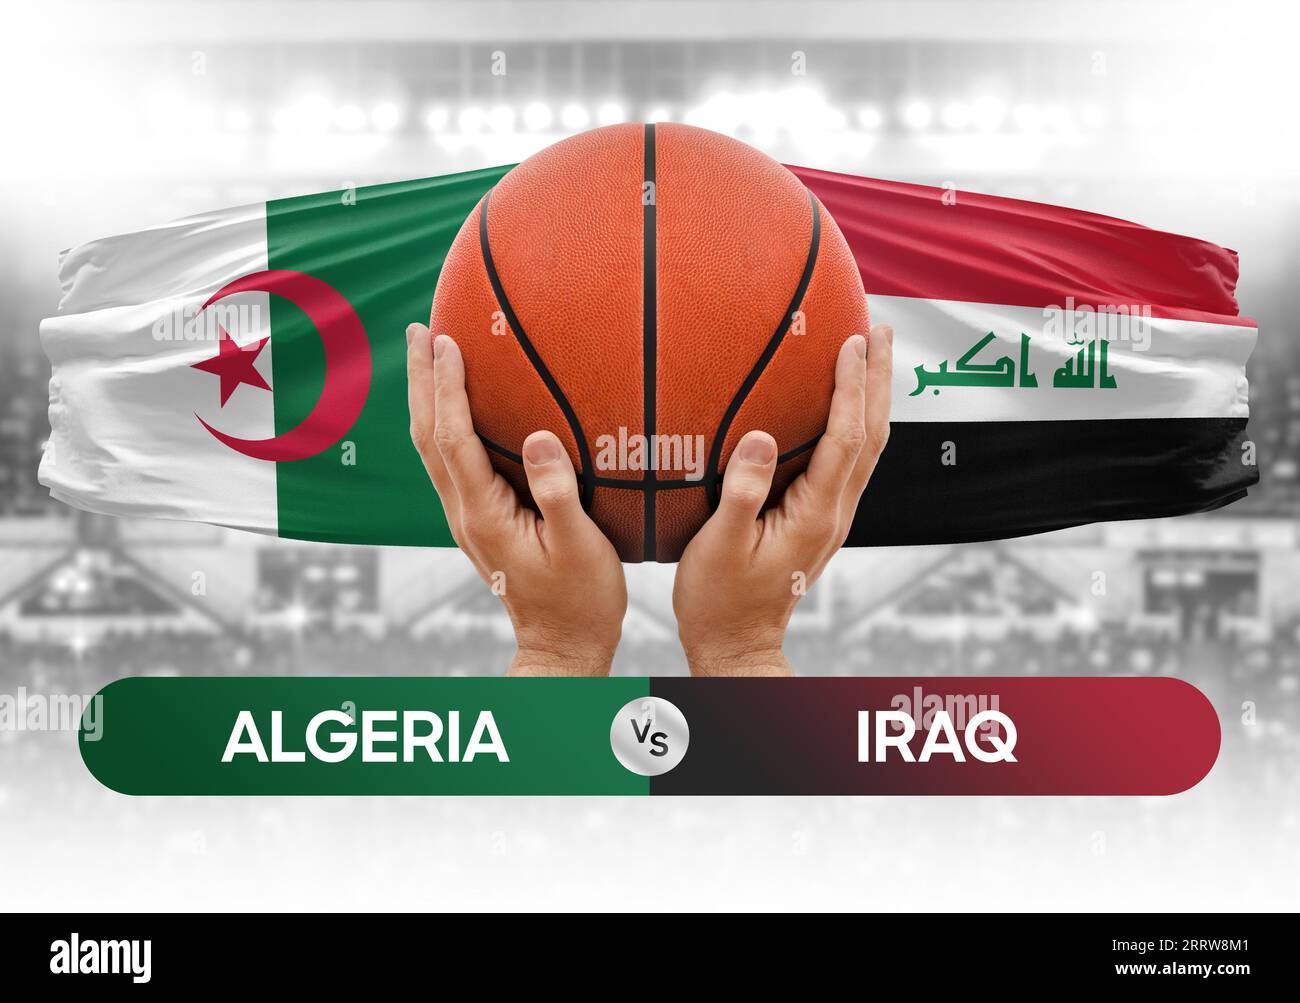 Algeria vs Iraq national basketball teams basket ball match competition cup concept image Stock Photo